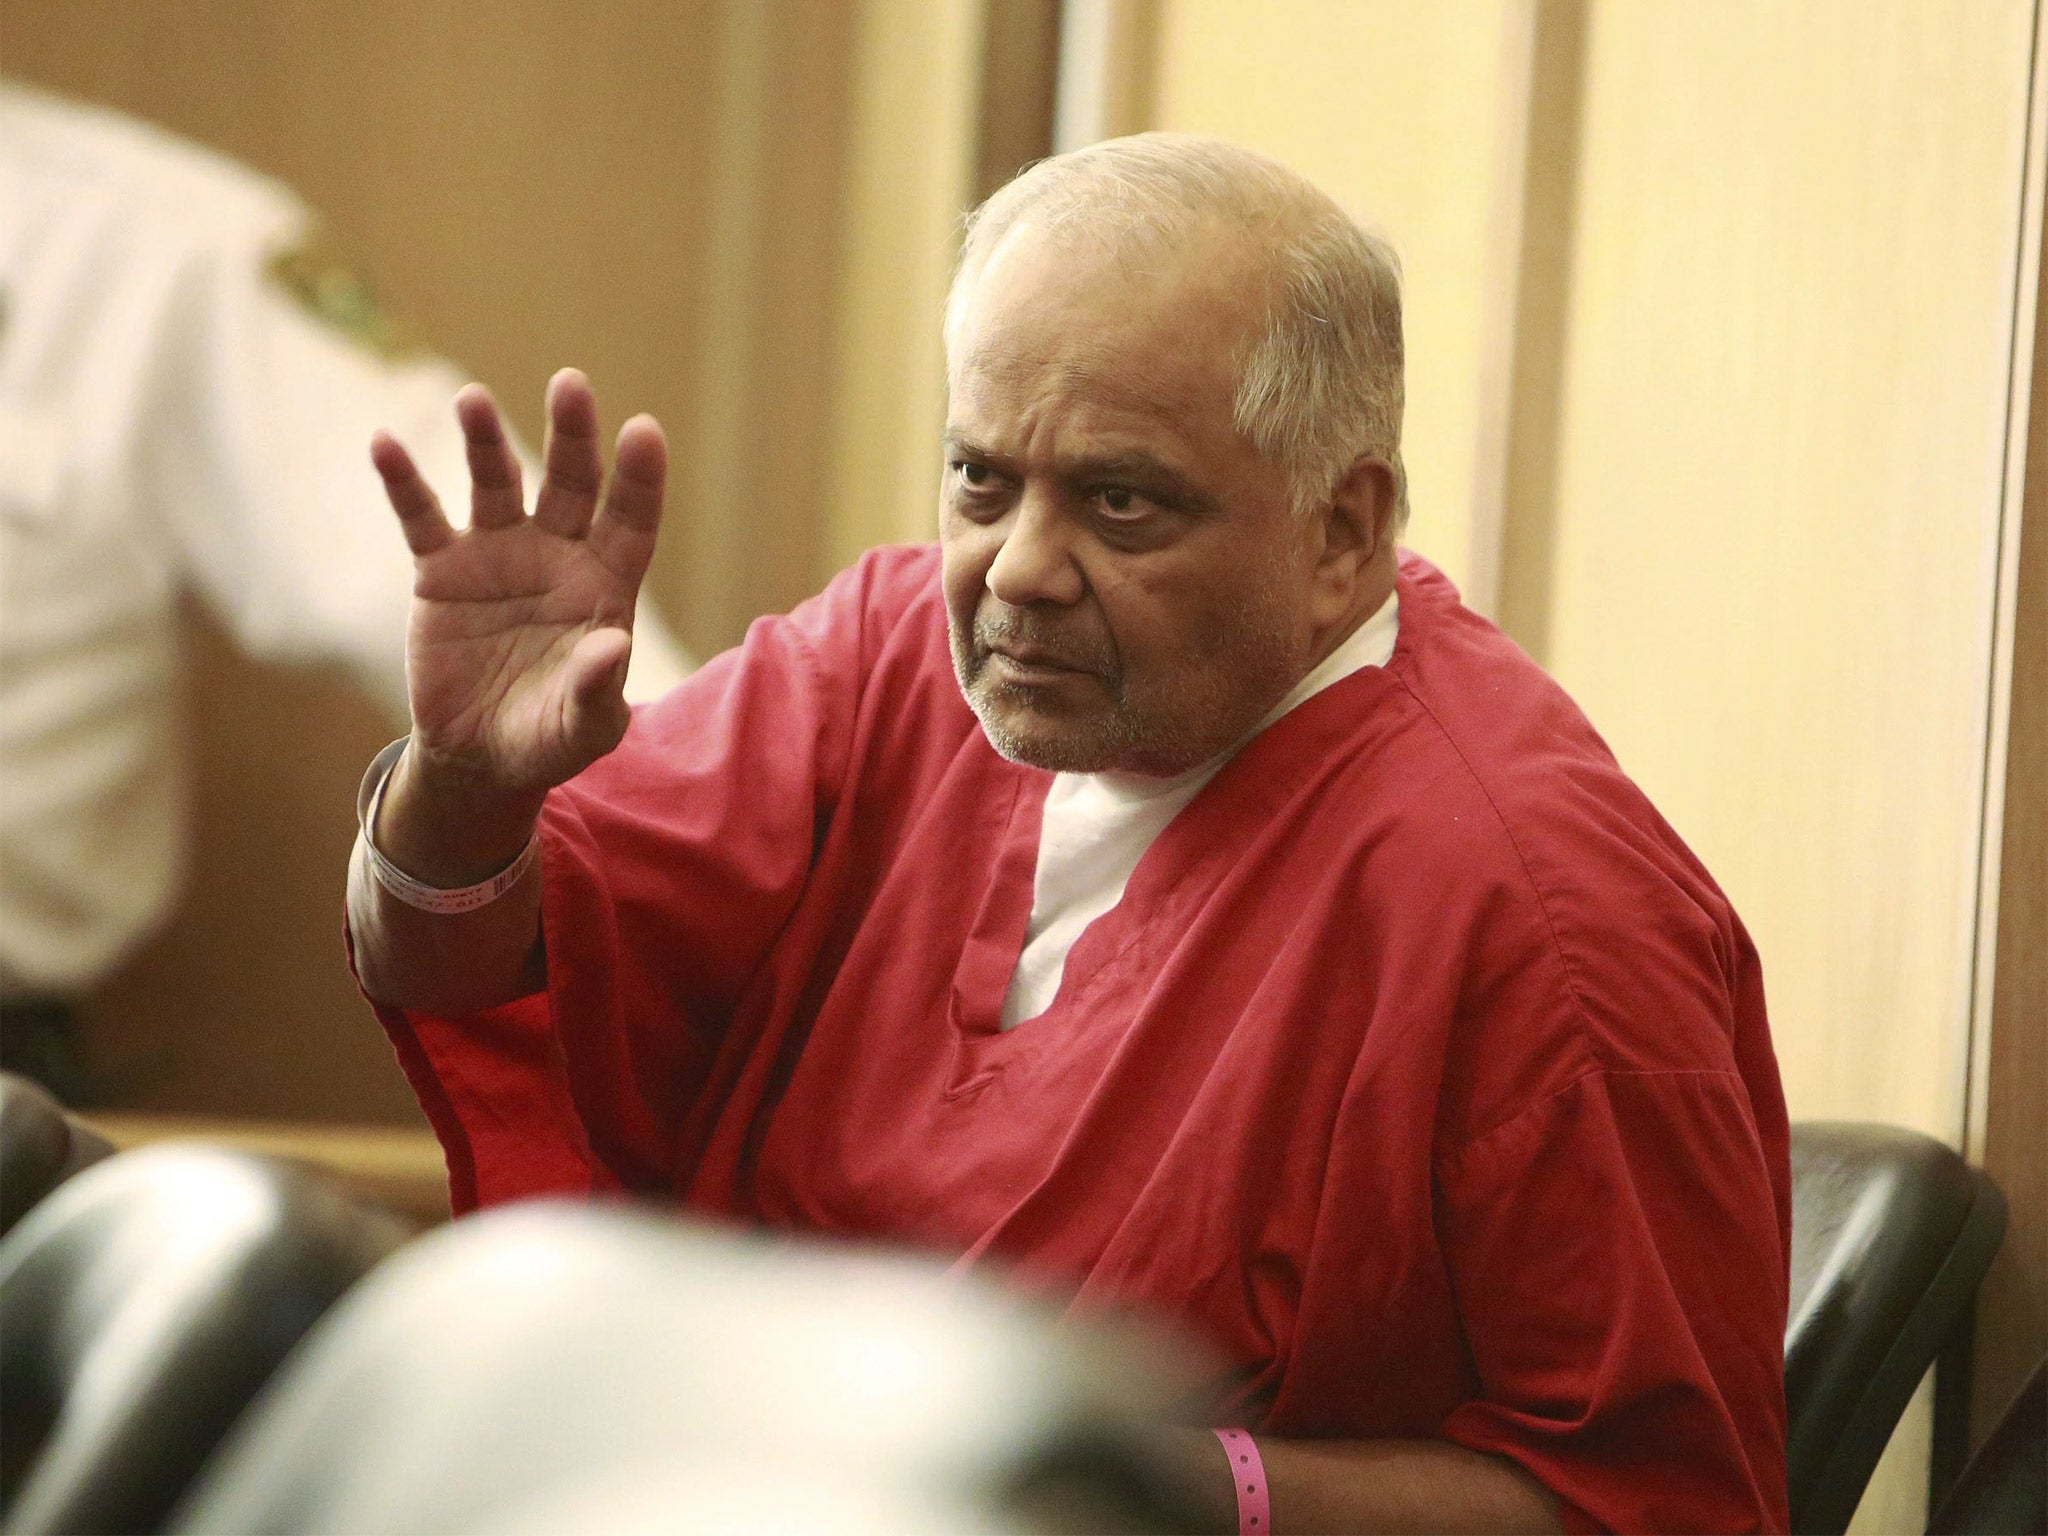 Krishna Maharaj has spent 28 years in a US jail convicted of a double killing in a hotel room he says he didn’t do